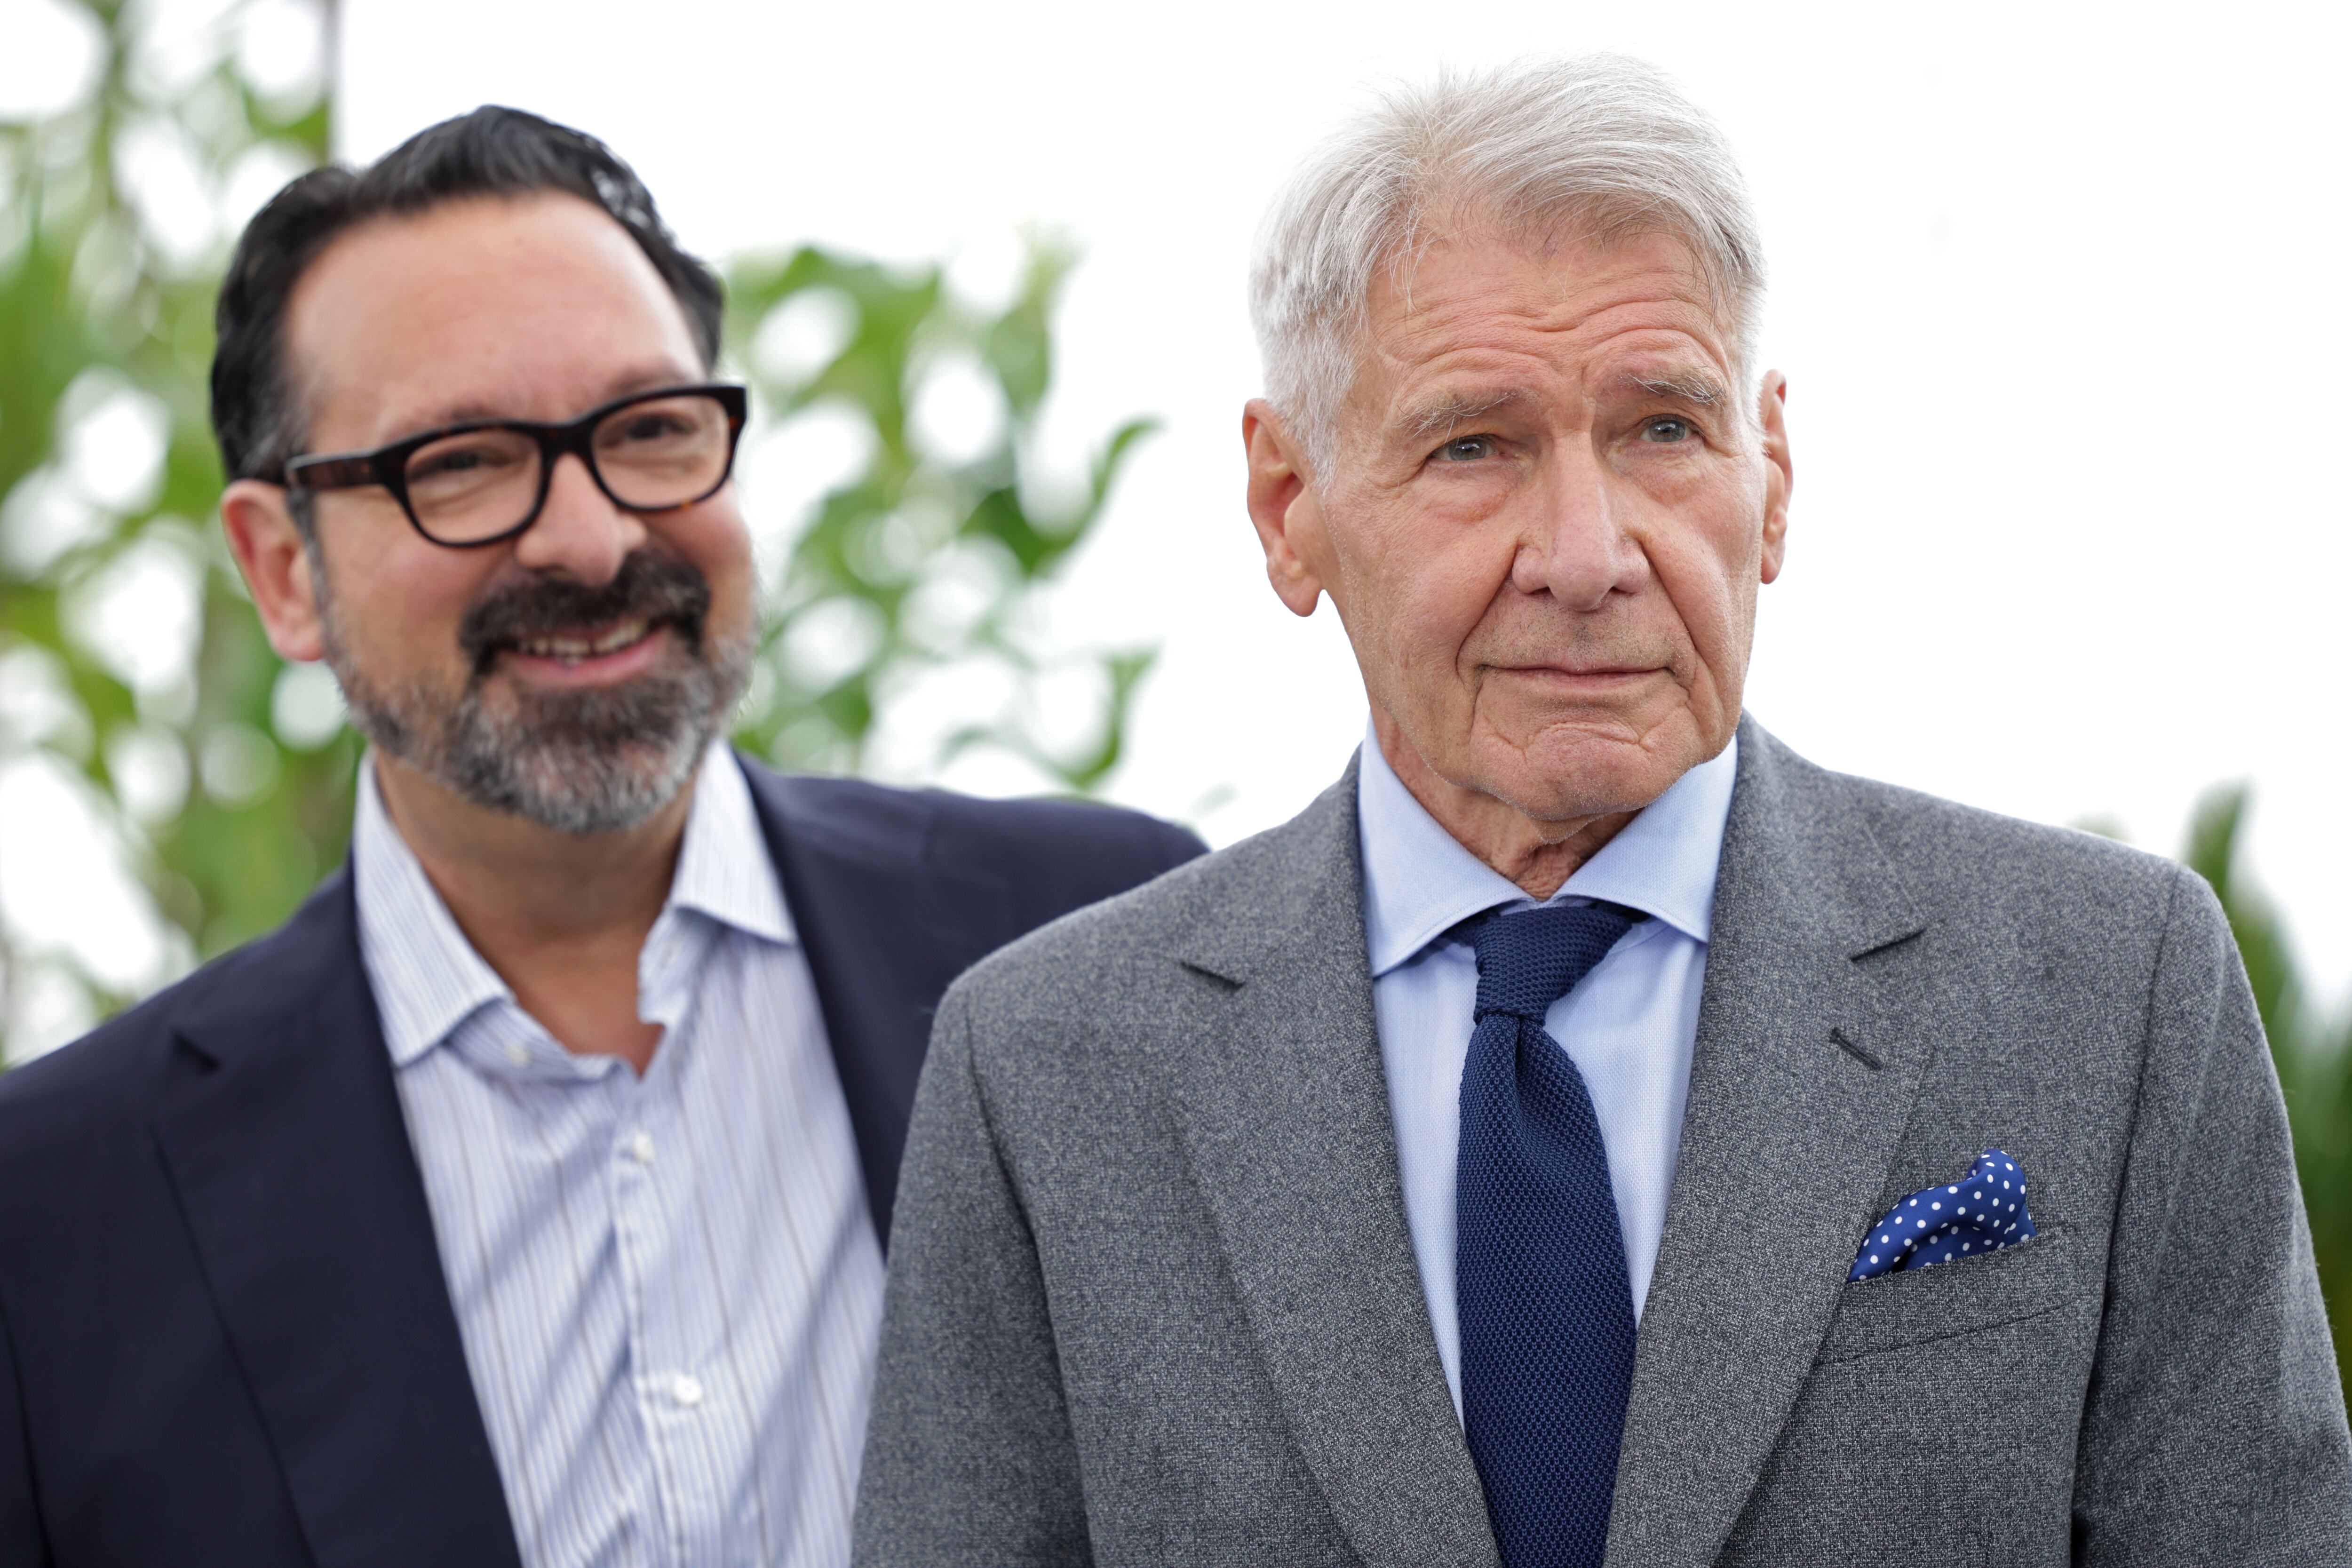 James Mangold and Harrison Ford during the screening of 'Indiana Jones and the Dial of Destiny' at the 2023 Cannes Film Festival.